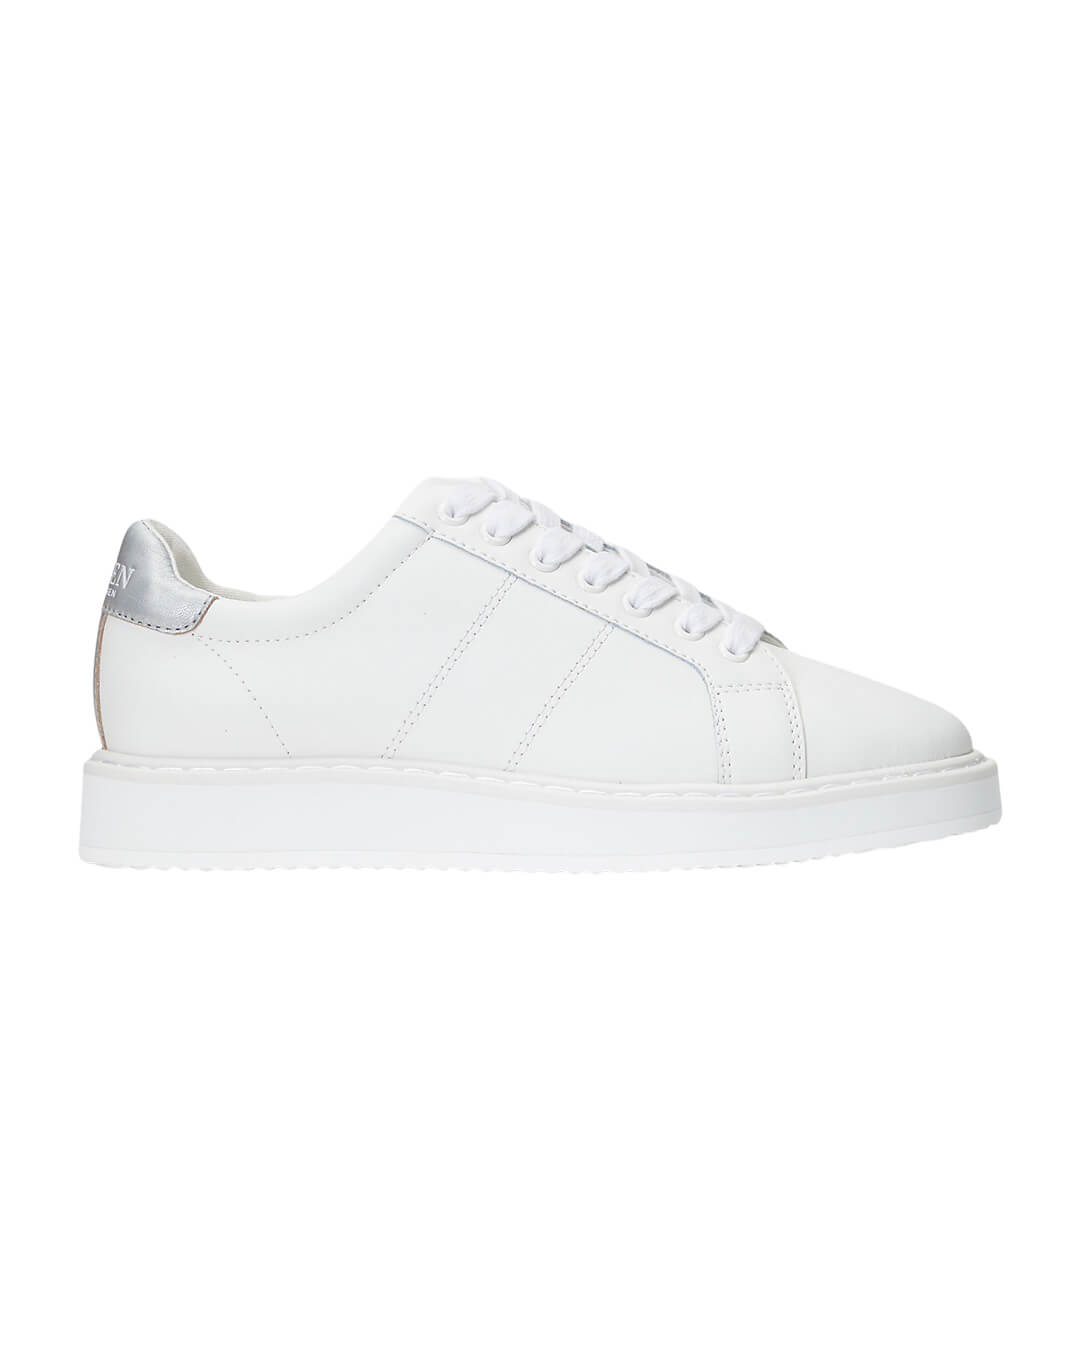 Lauren By Ralph Lauren Shoes Lauren By Ralph Lauren Angeline Silver And White Sneakers